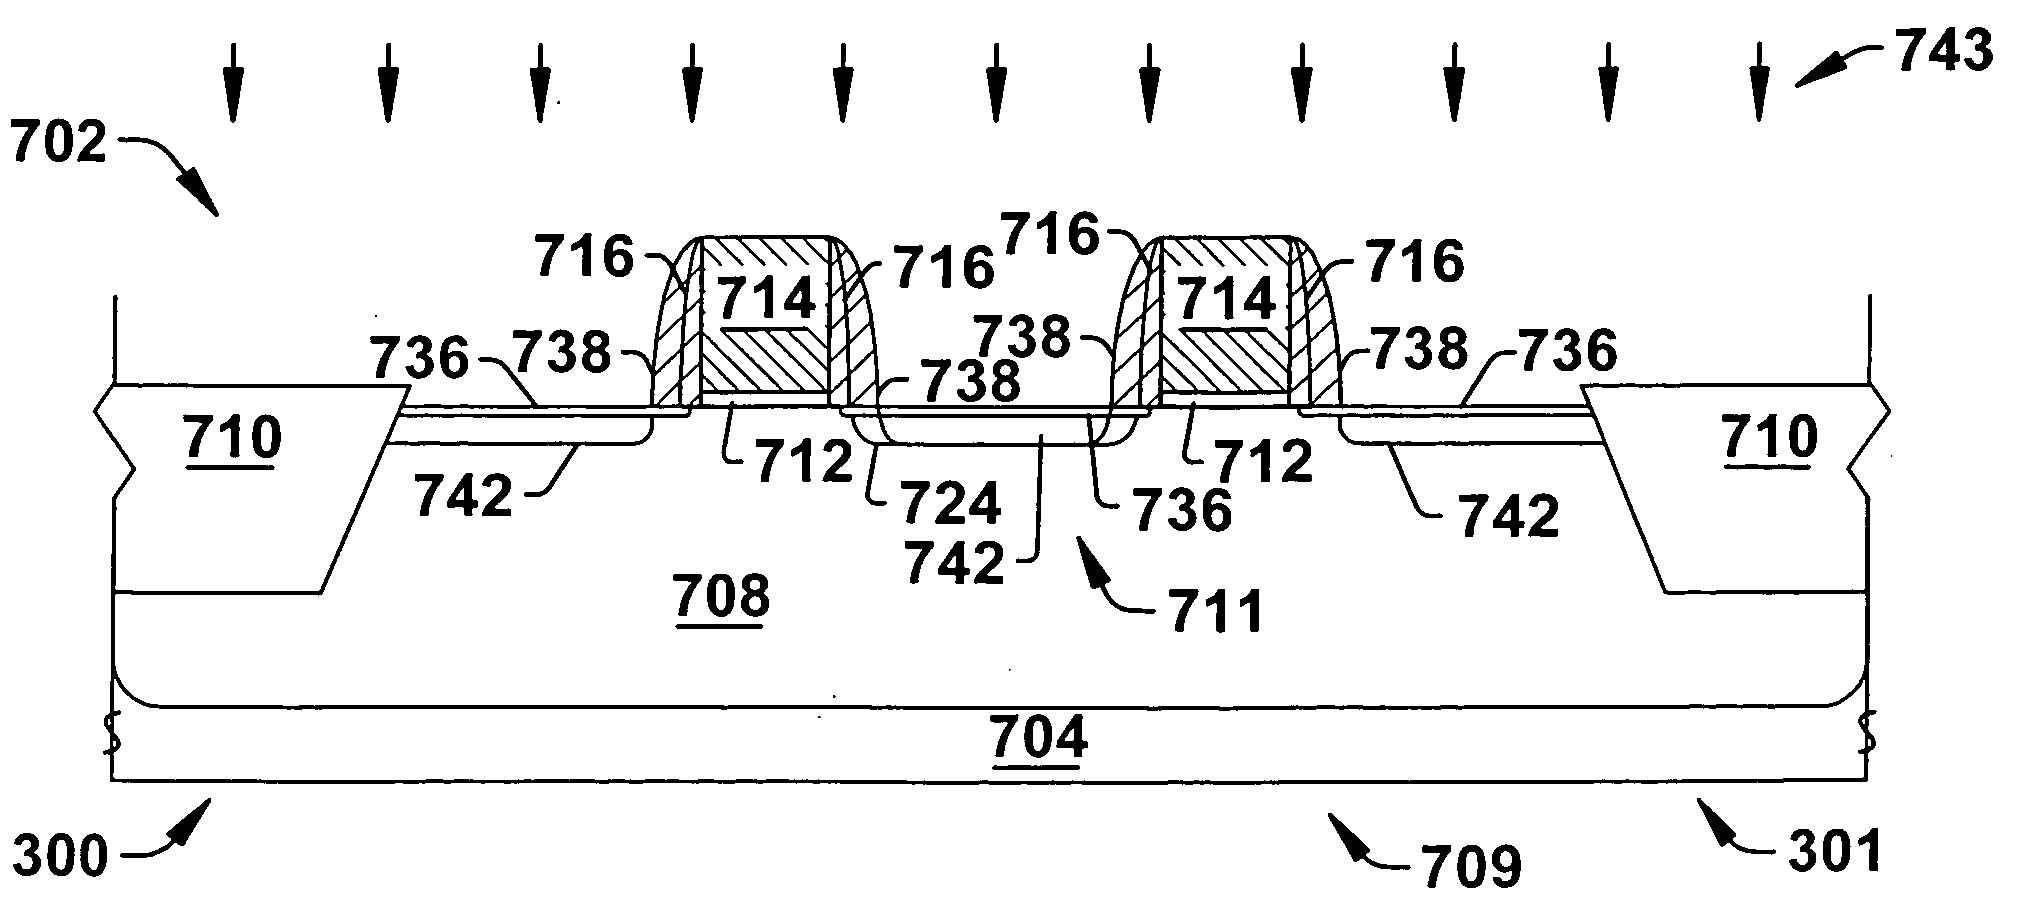 Method to prevent defects on SRAM cells that incorporate selective epitaxial regions